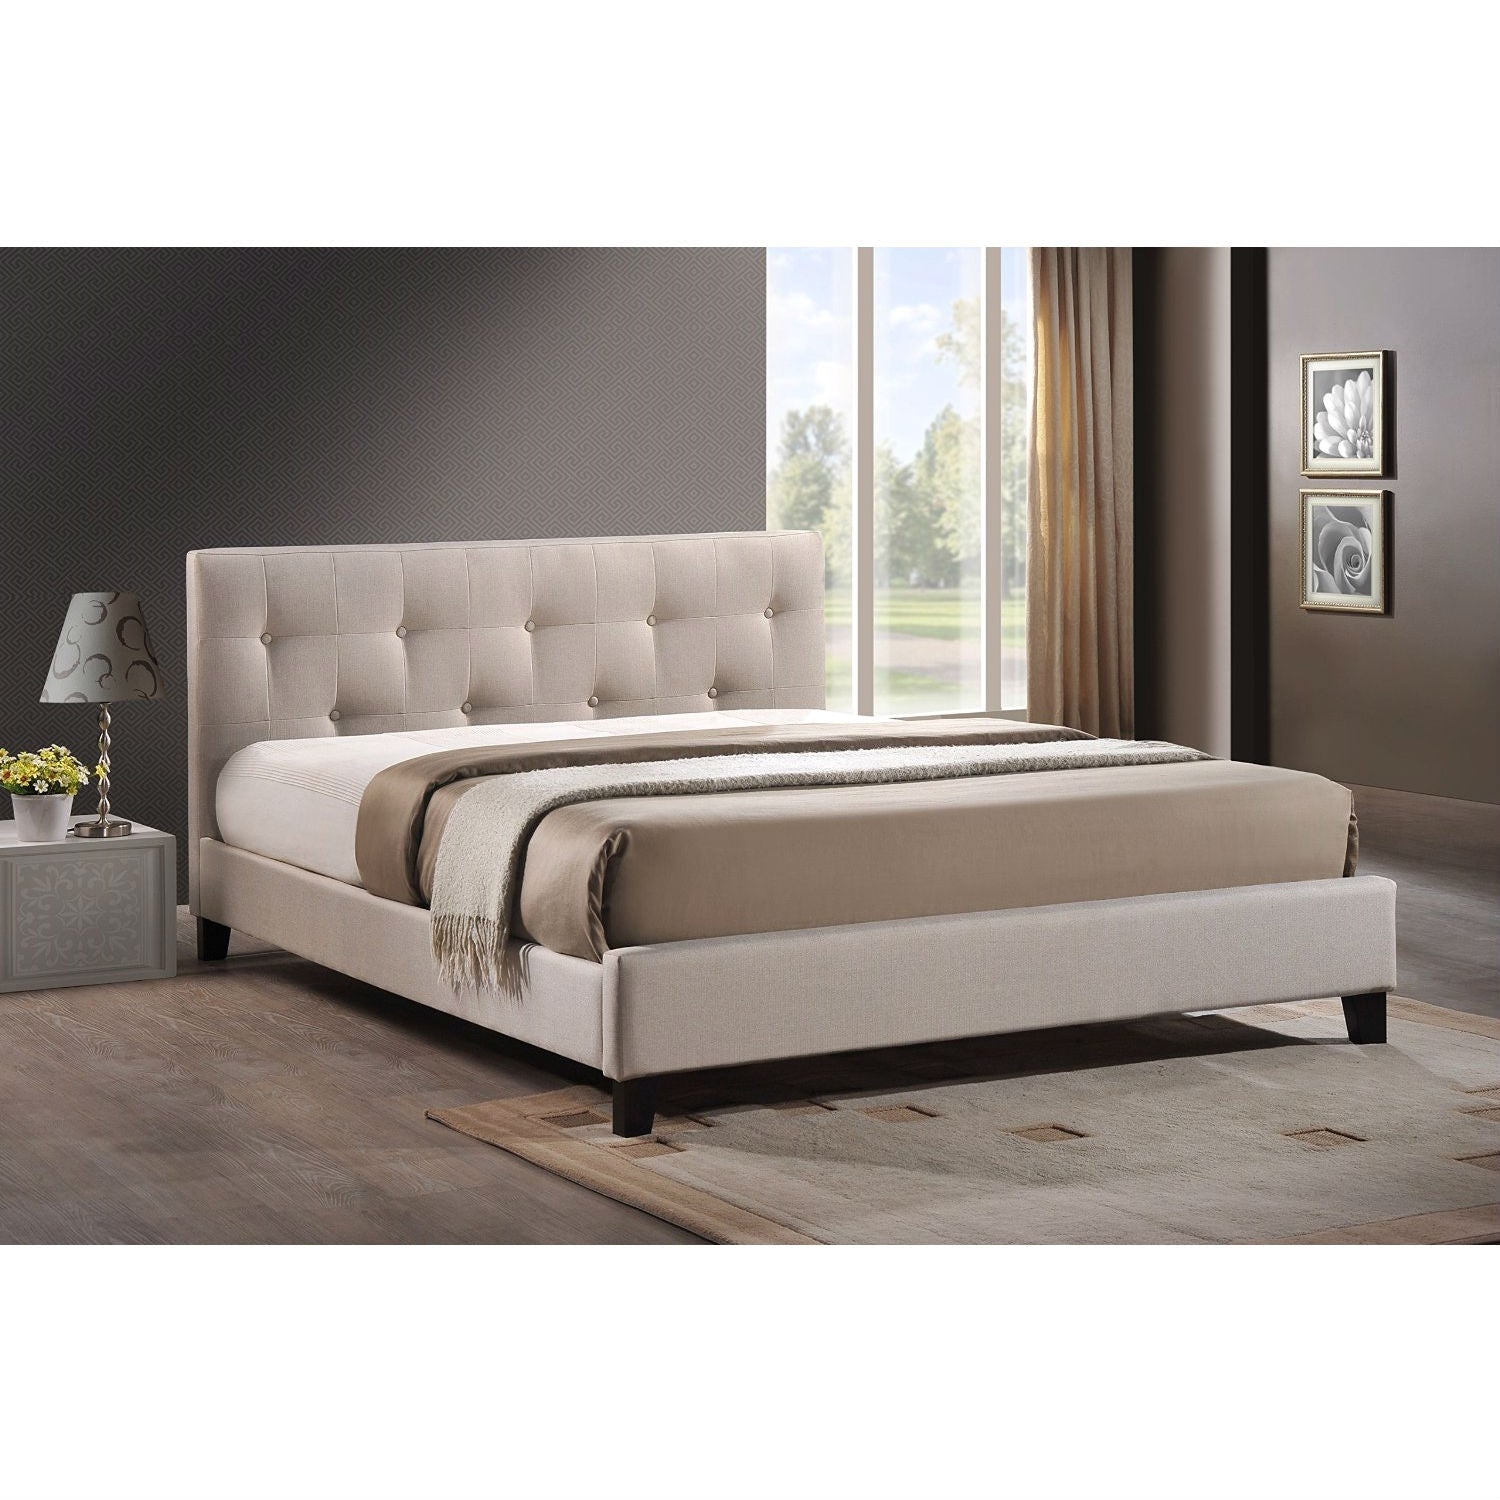 Bedroom - Full Size Modern Platform Bed With Beige Fabric Upholstered Headboard